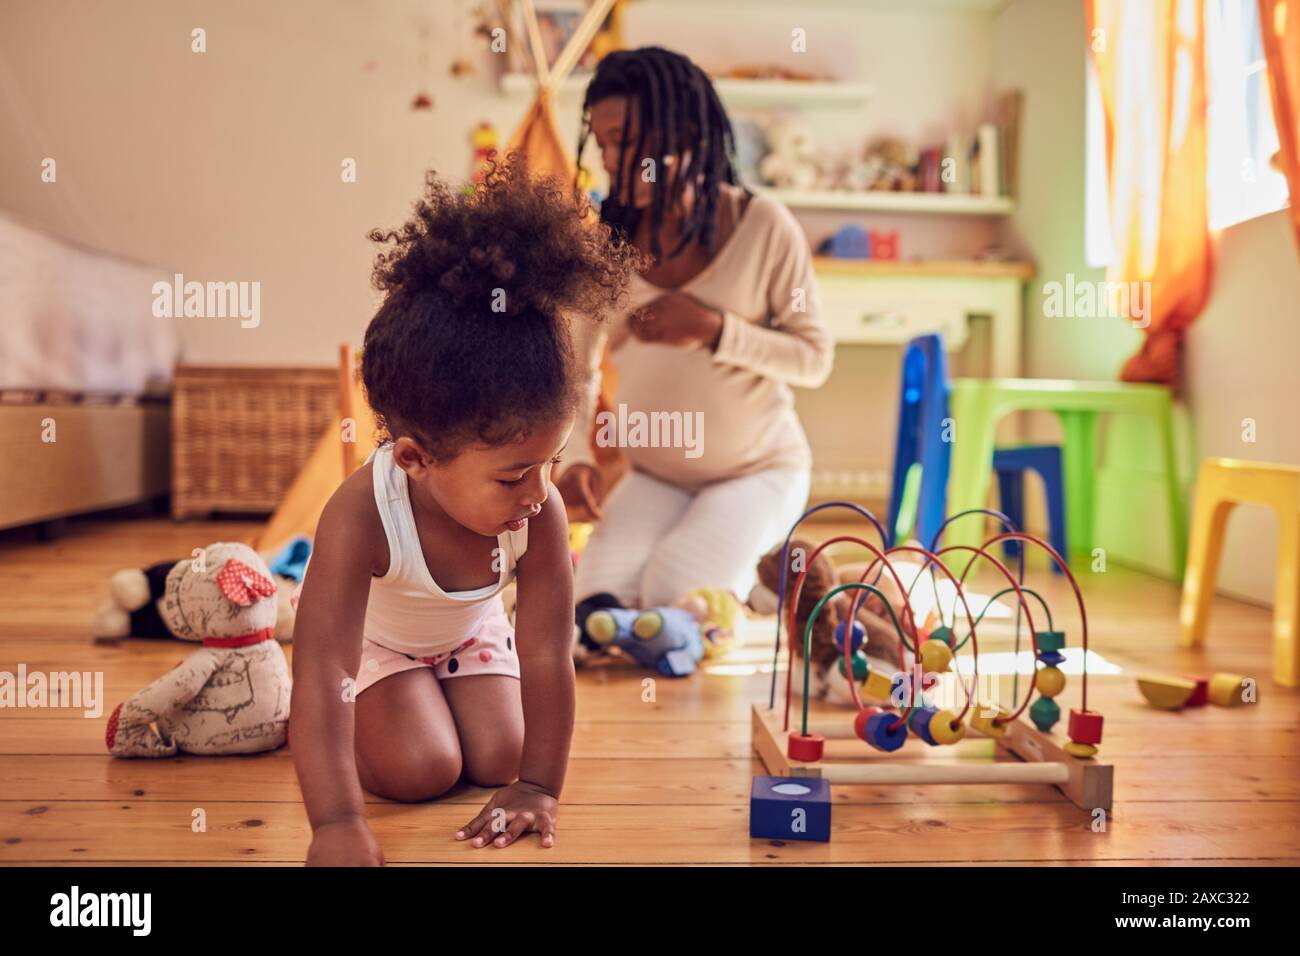 Pregnant mother and daughter playing with toys Stock Photo